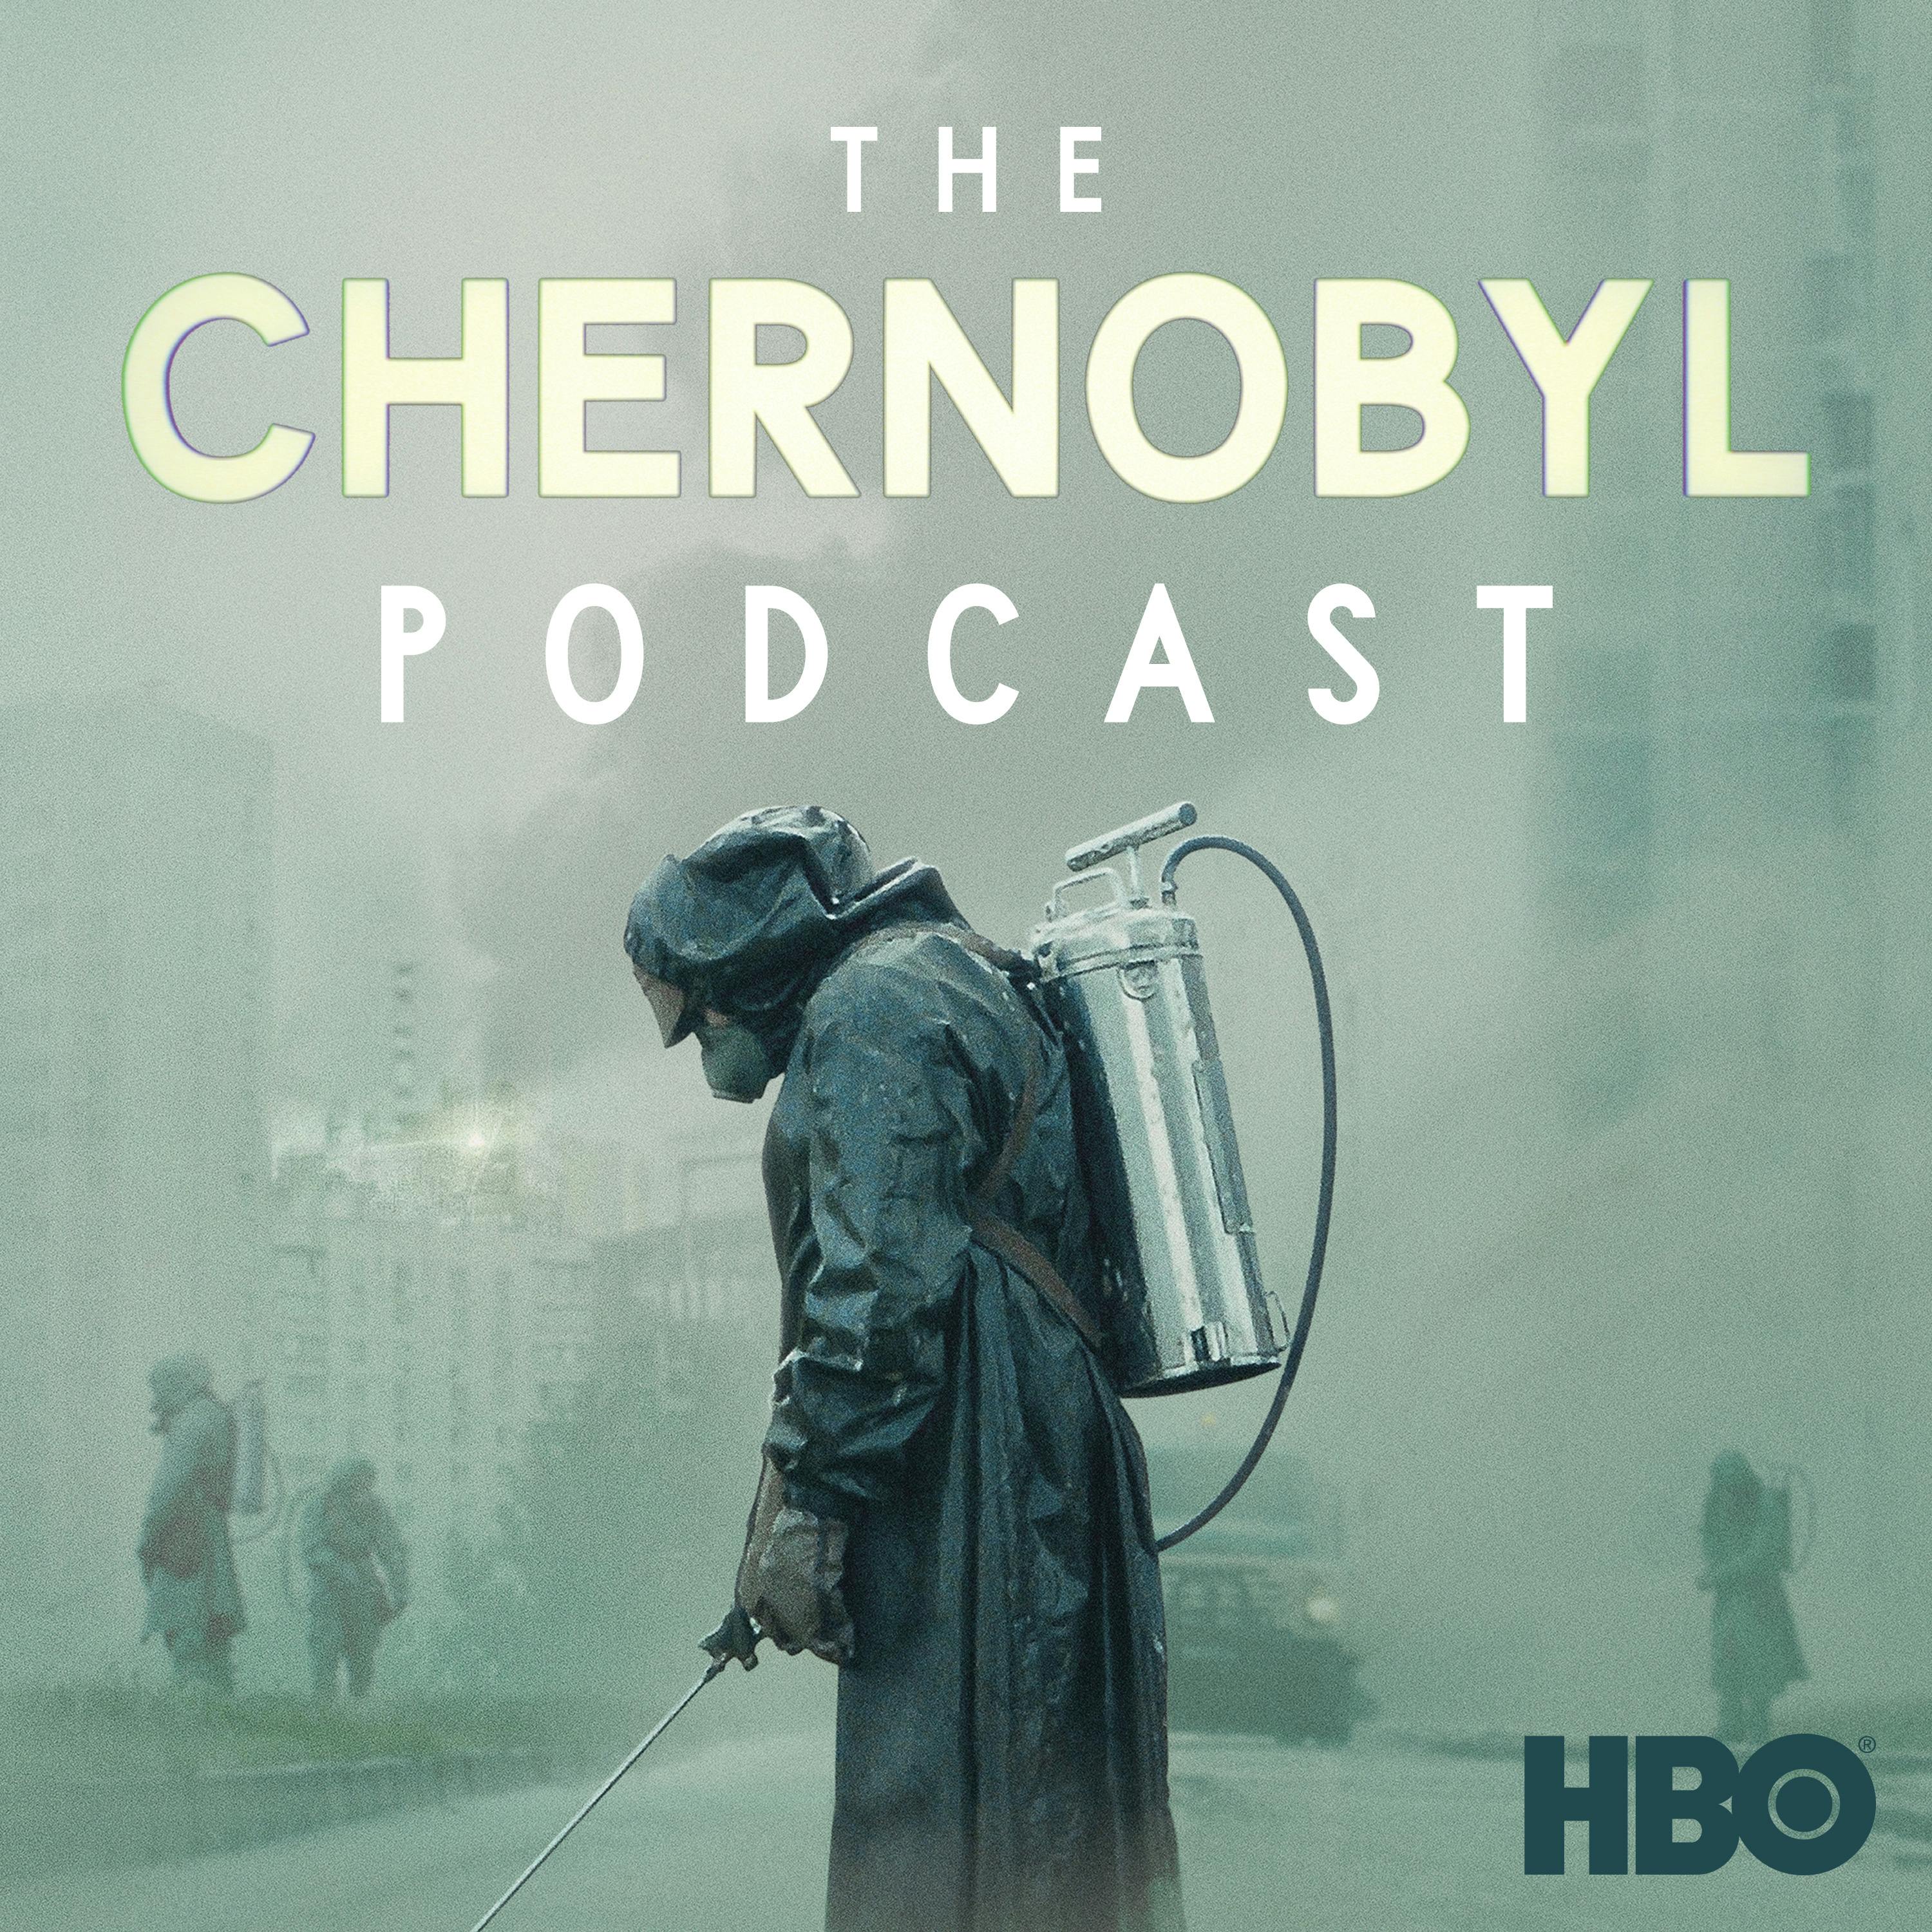 The Chernobyl Podcast podcast show image